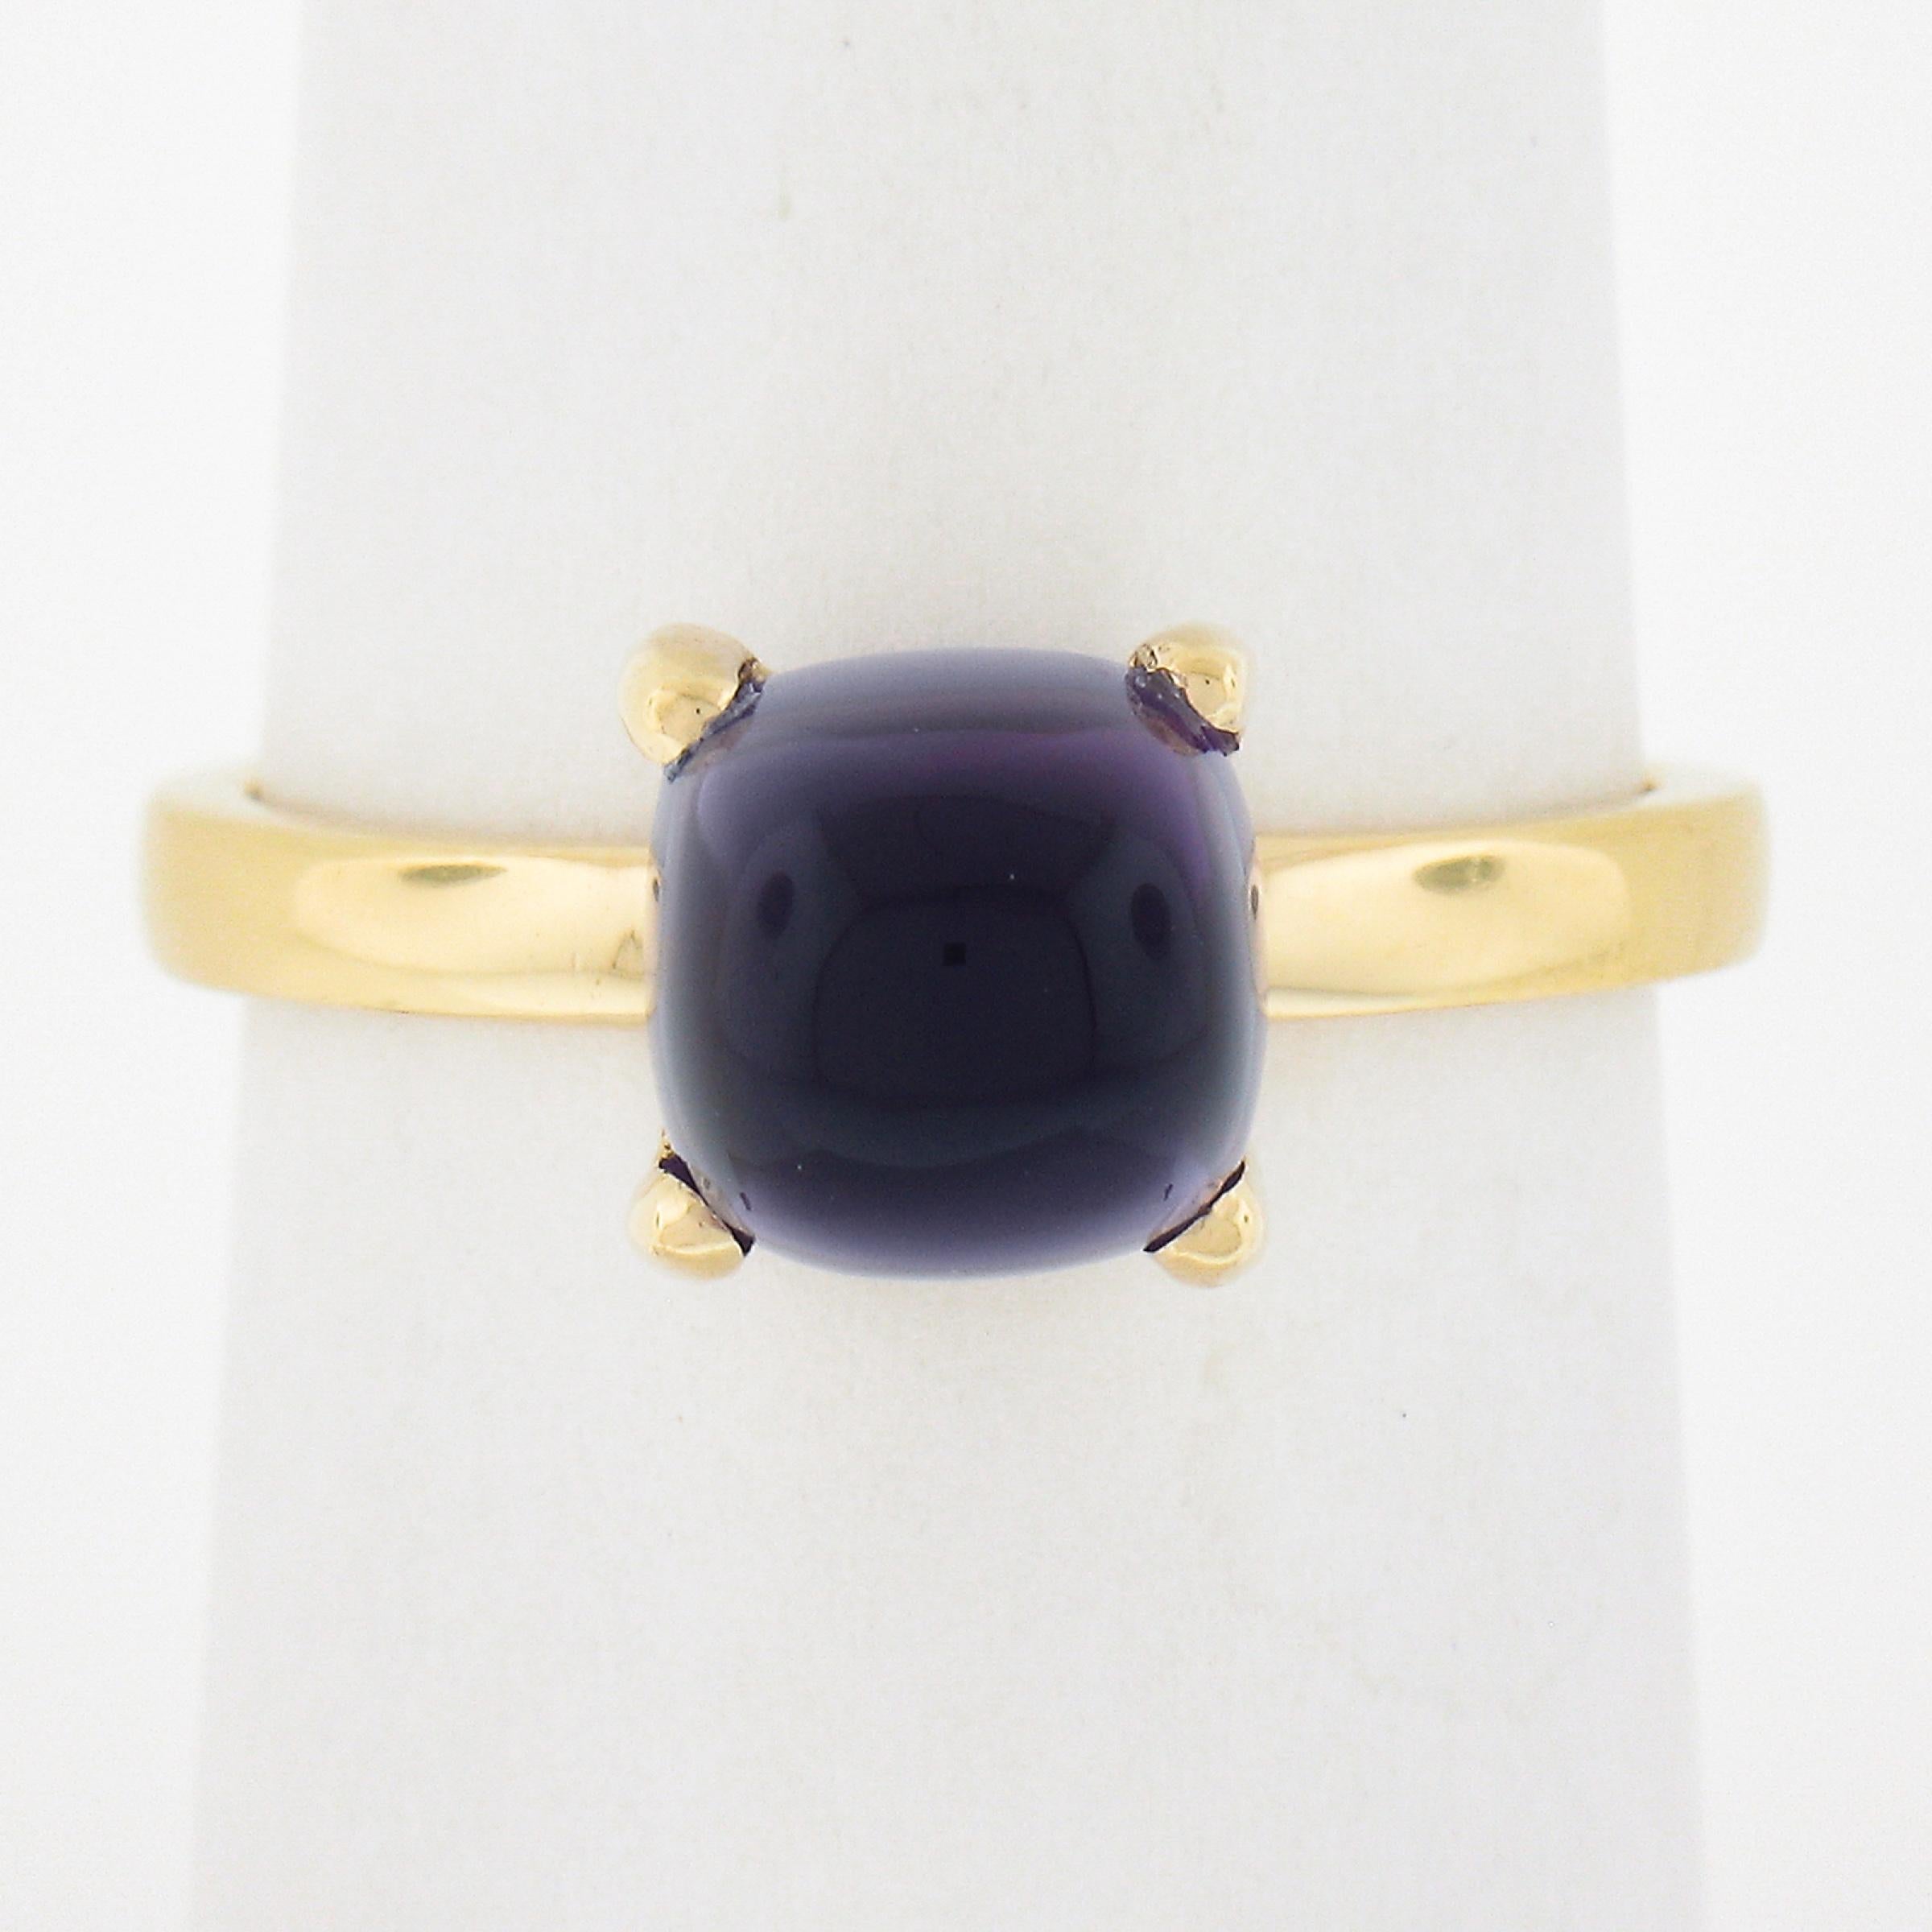 --Stone(s):--
(1) Natural Genuine Amethyst - Cabochon Sugarloaf Cut - Prong Set - Transparent Medium Purple Color 

Material: 18k Solid Yellow Gold
Weight: 4.35 Grams
Ring Size: 7.5 (Fitted on a finger. We can custom size this ring. Please contact